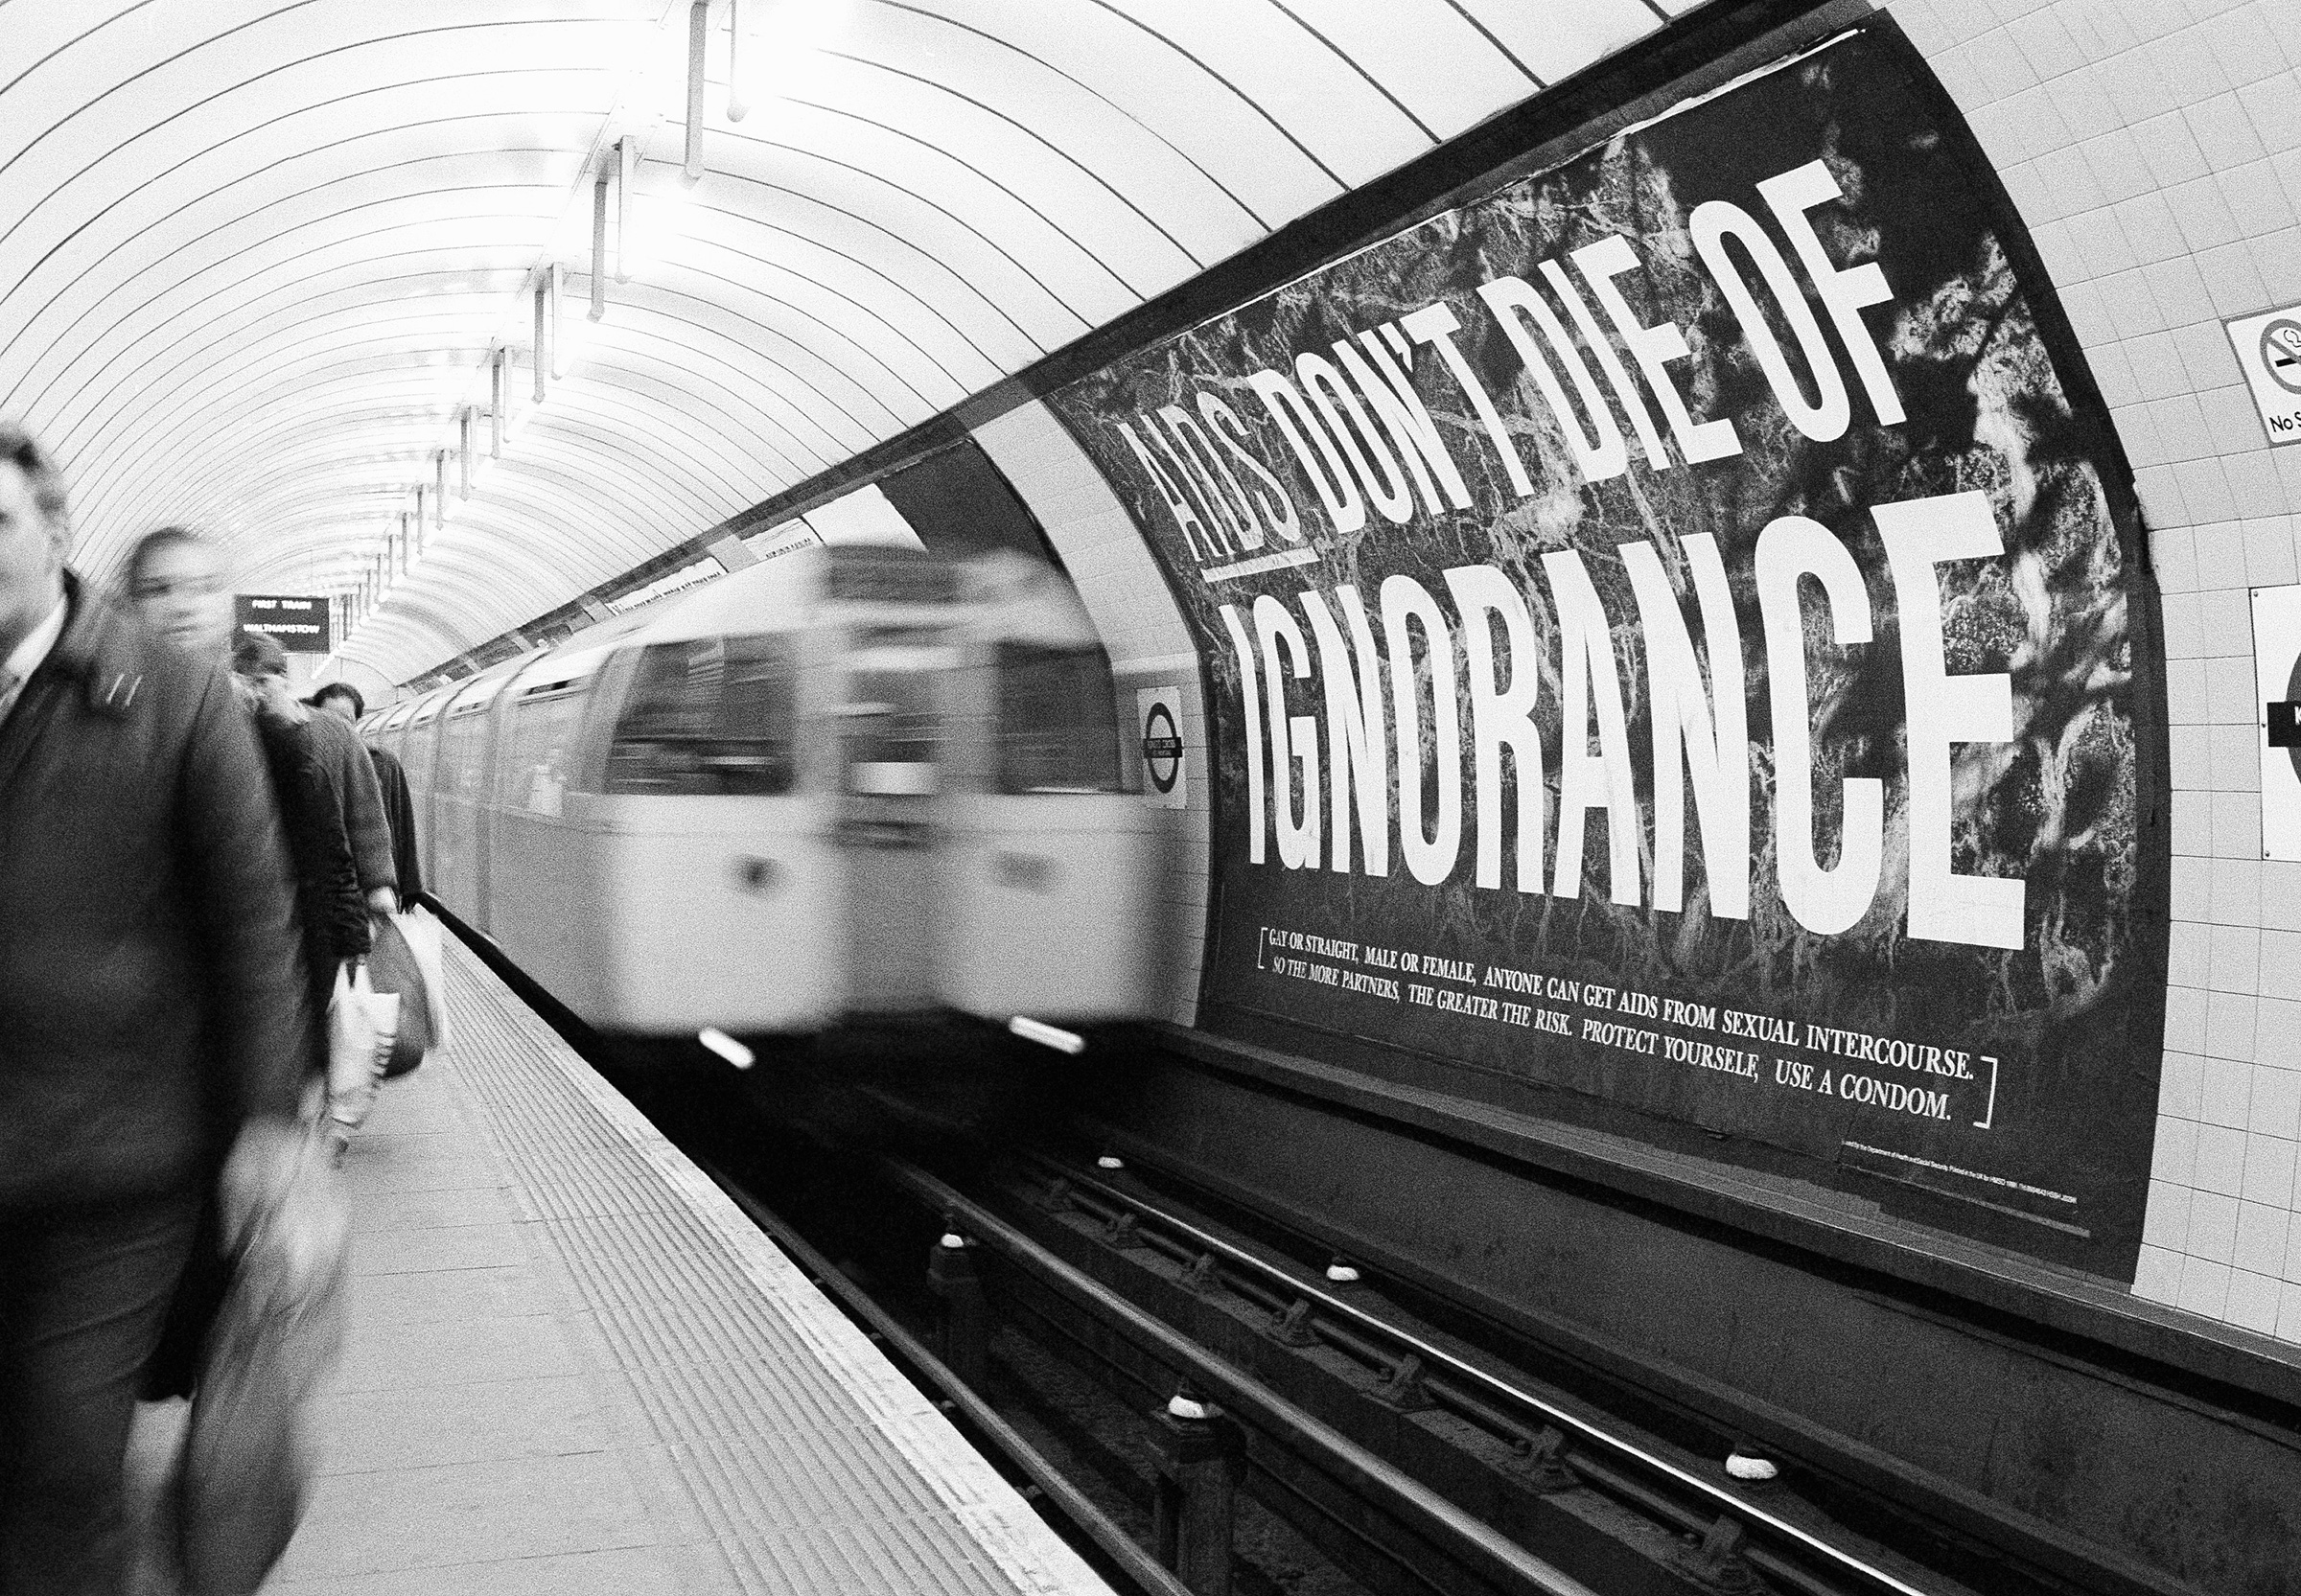 With an average of two people a day dying of AIDS in Britain, the government blitzed the nation with warning posters as part of its 20 million pound media campaign, pictured on March 5, 1987. This poster confronted passengers at the Kings Cross subway station in central London.